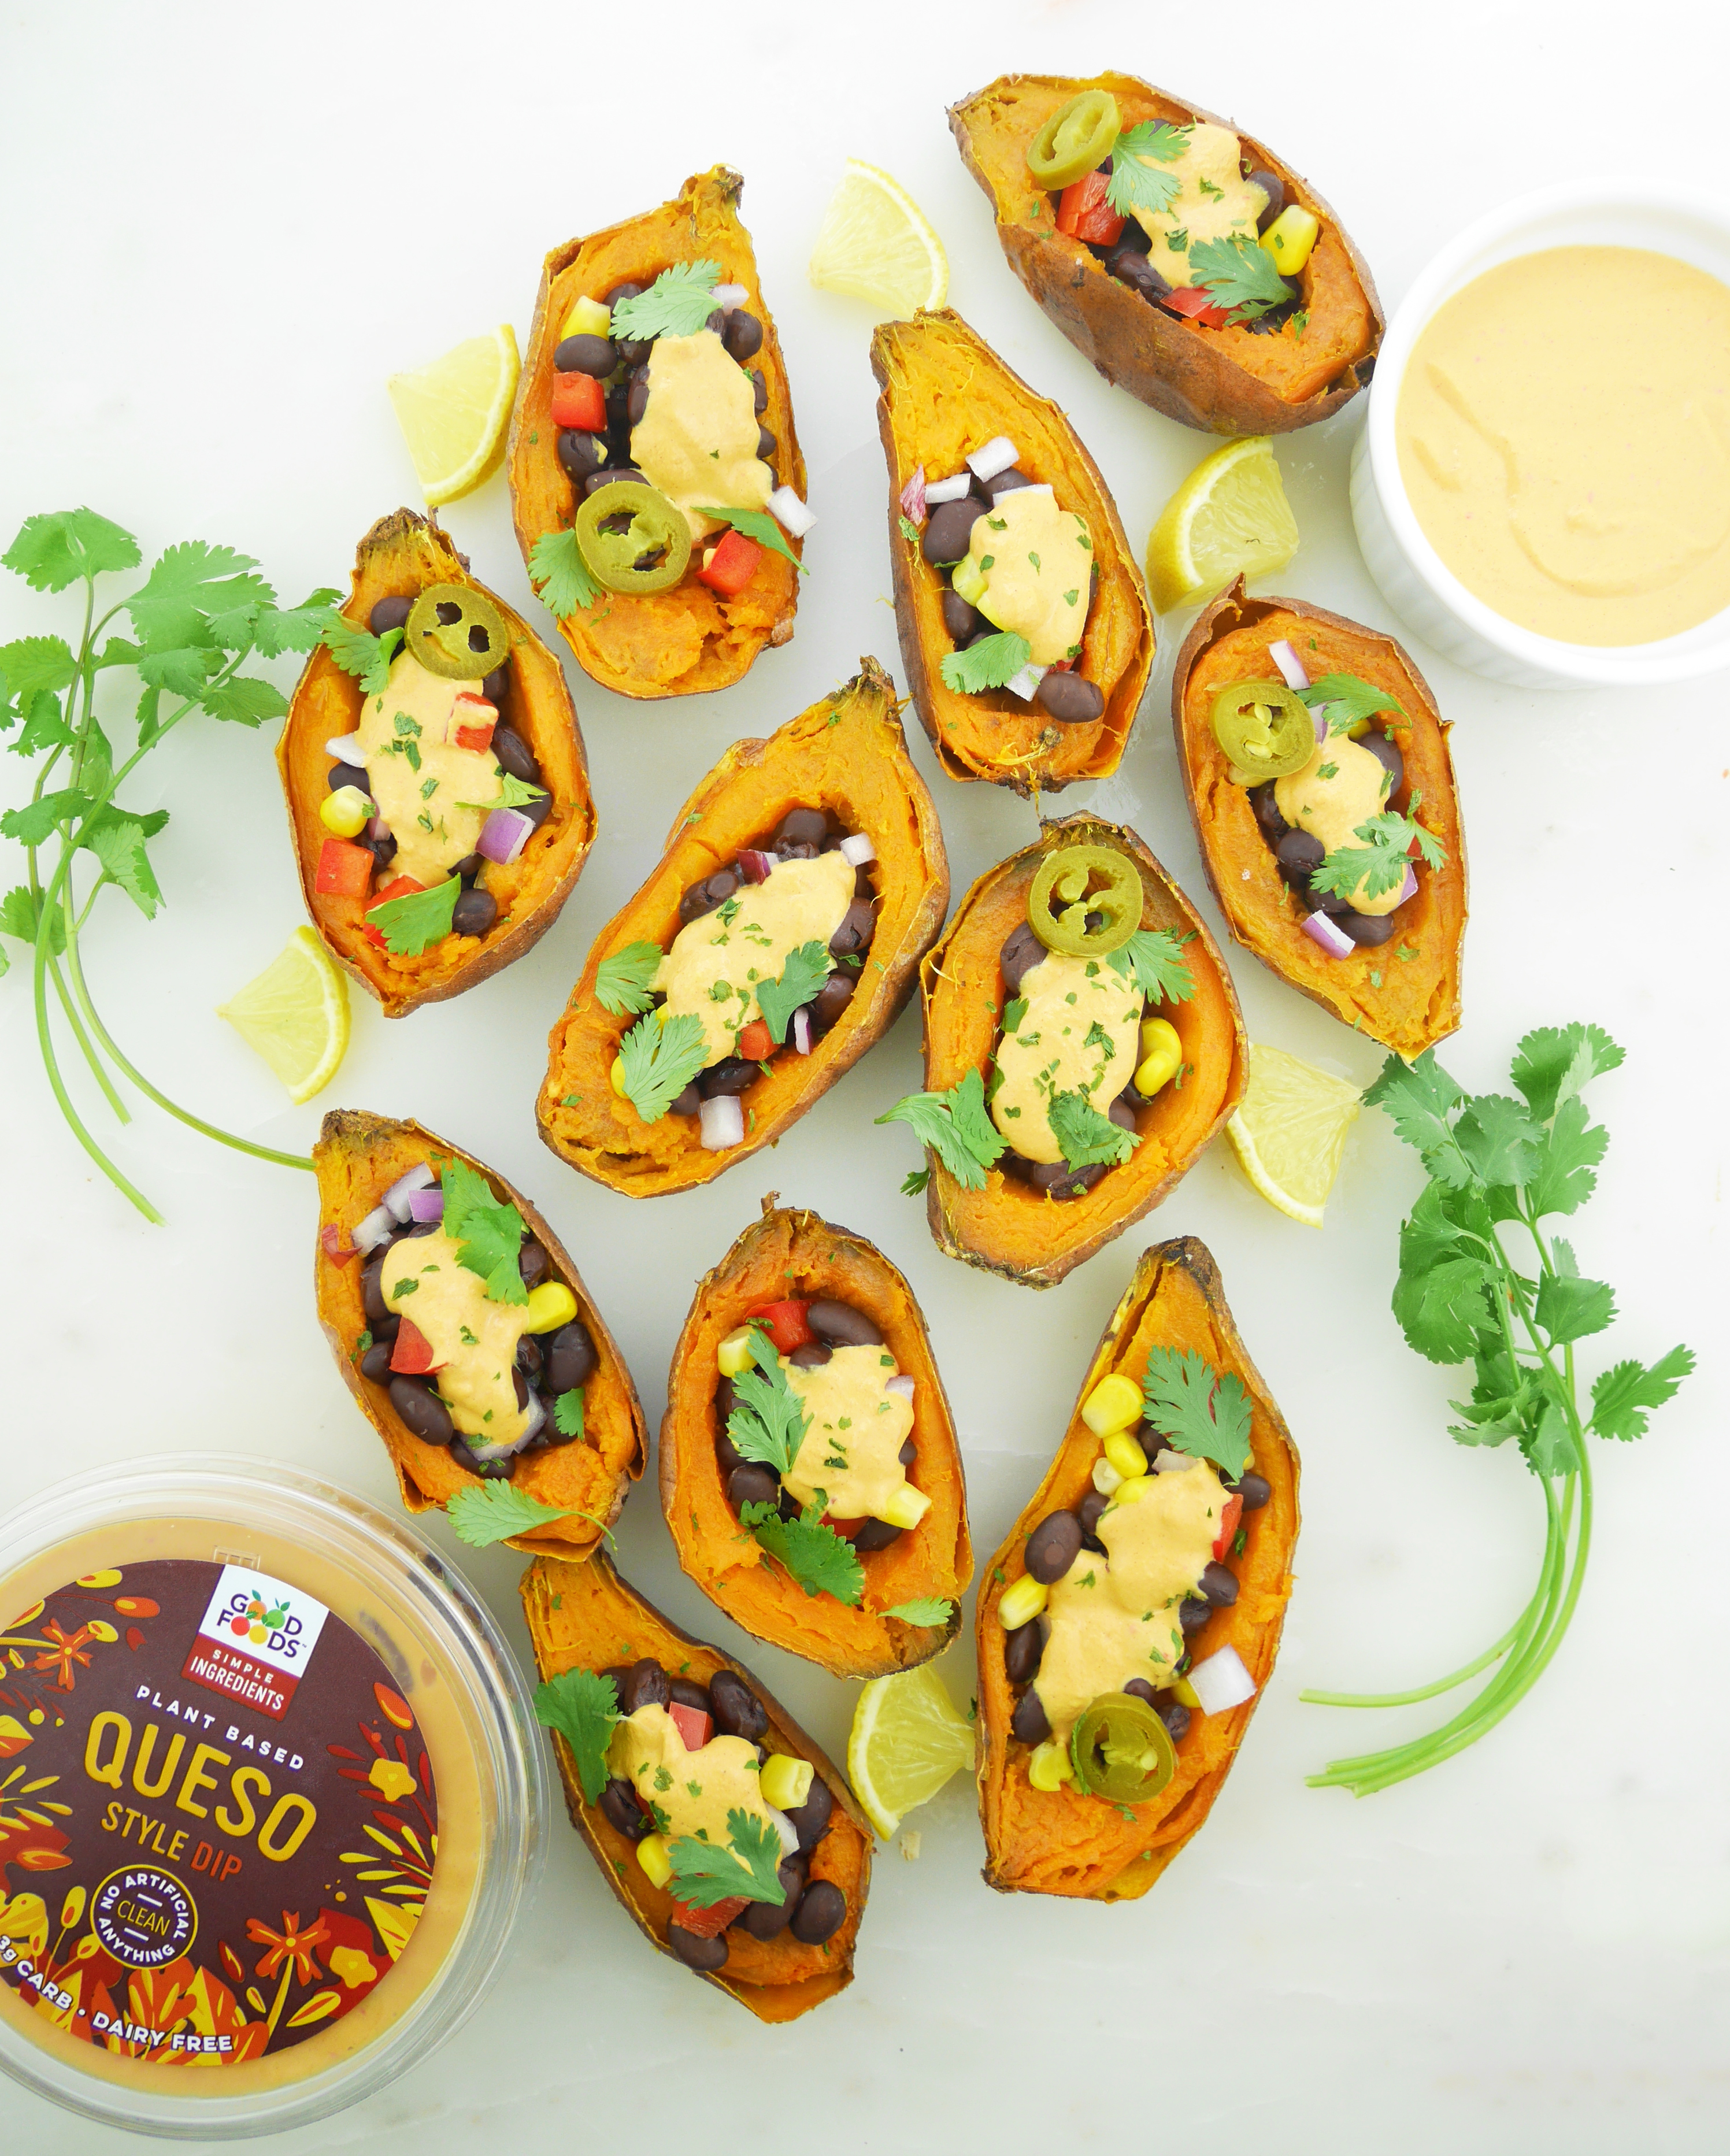 Good Foods Group Plant Based queso style dip